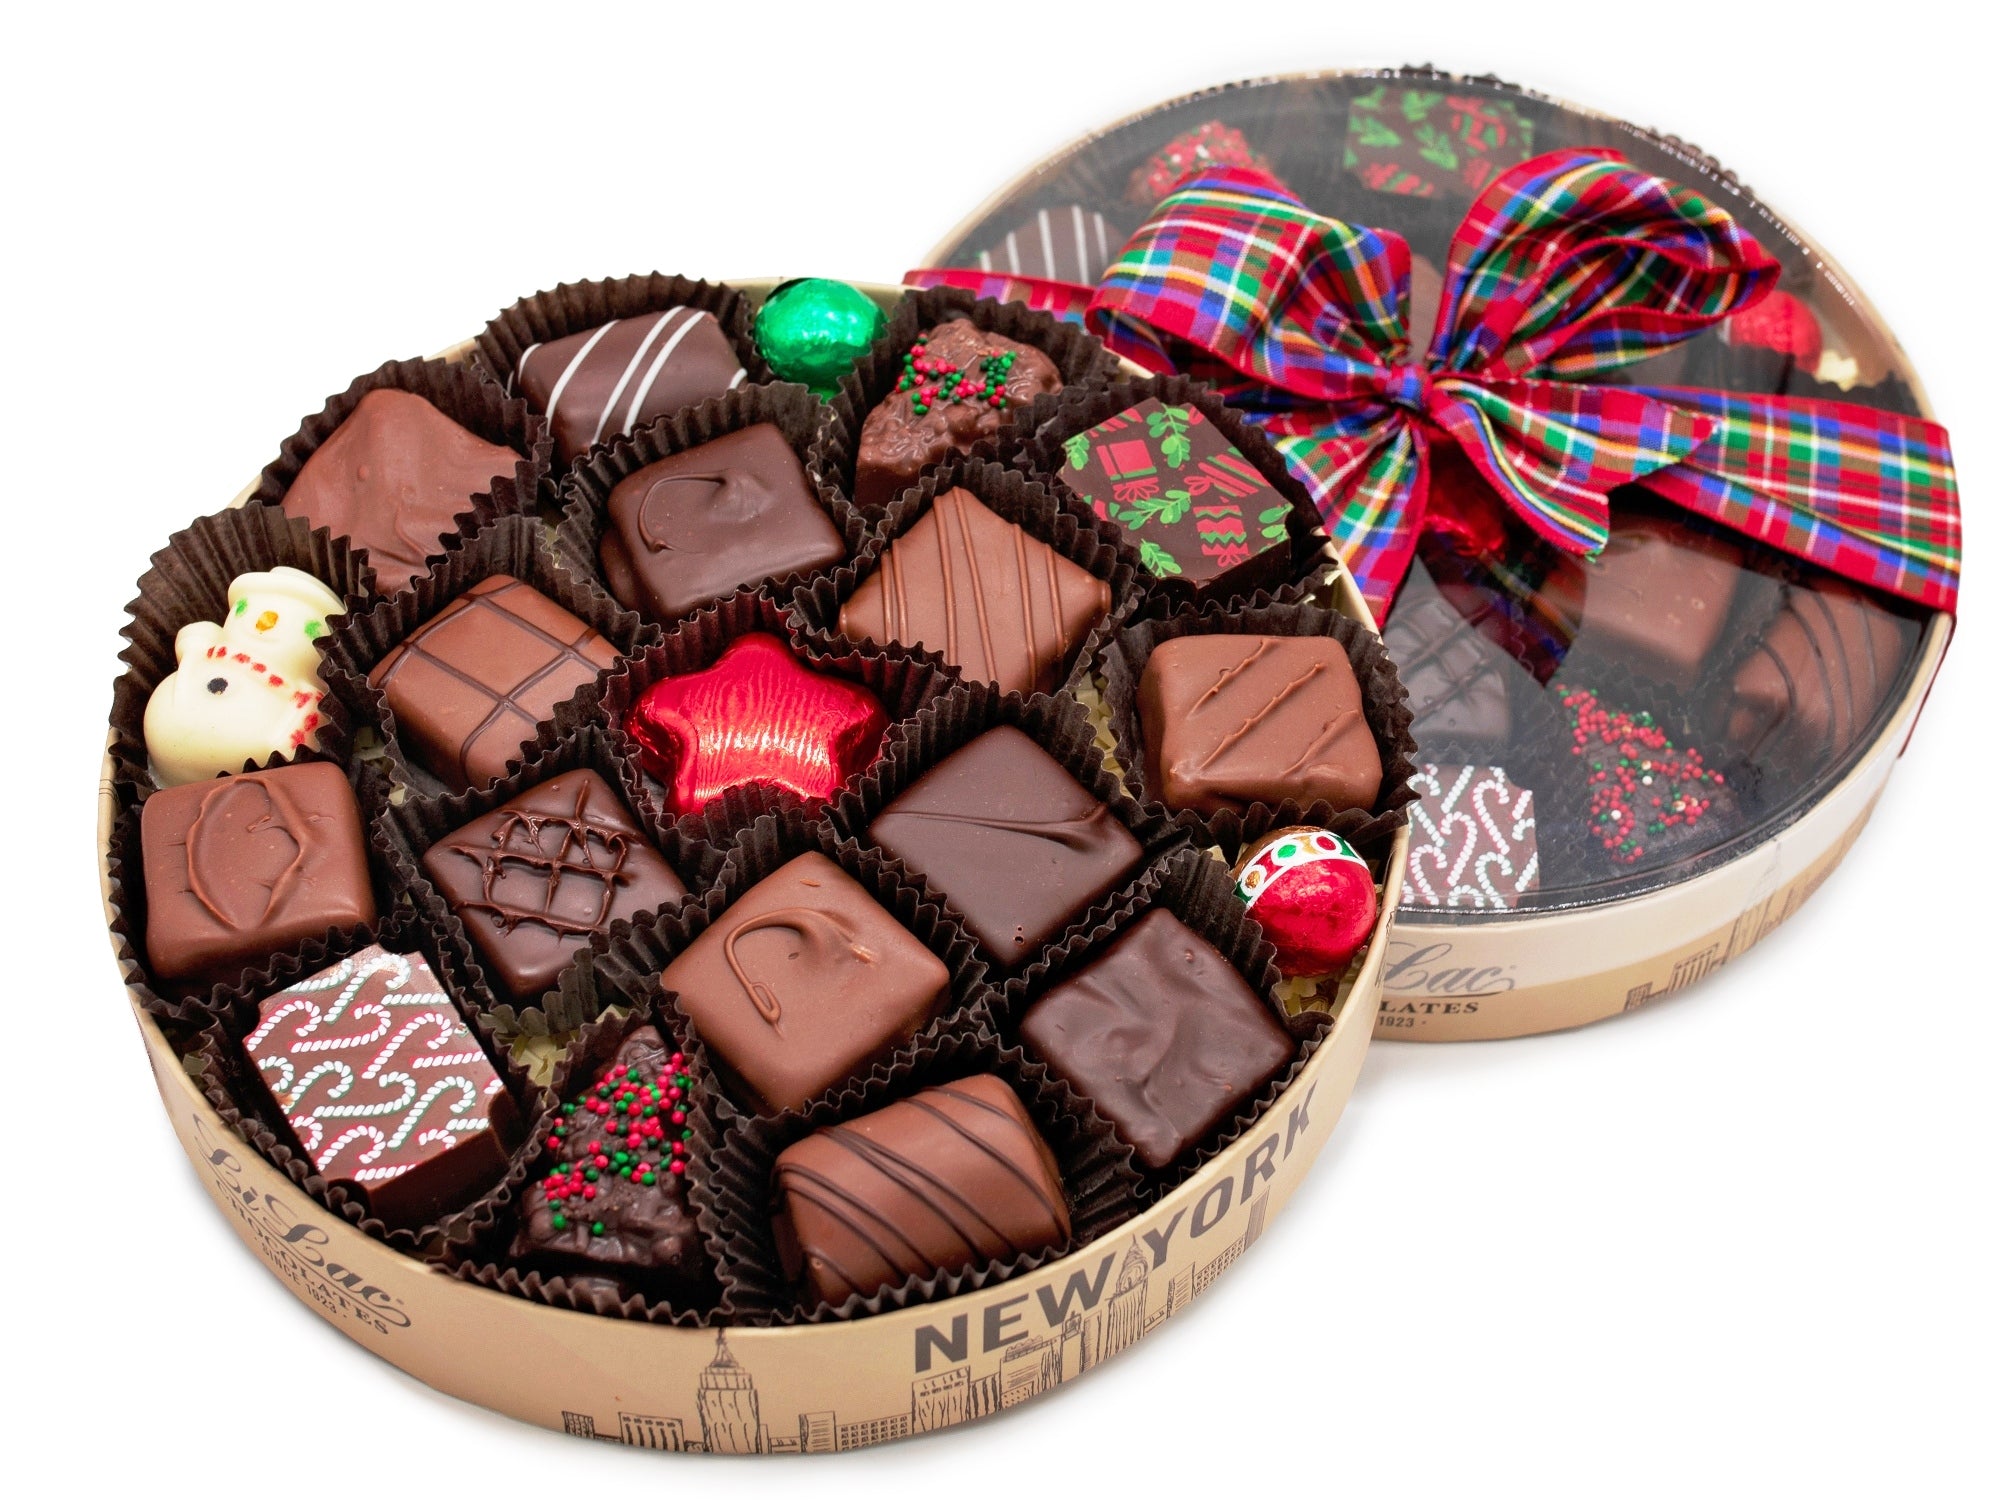 Christmas corporate chocolate gifts